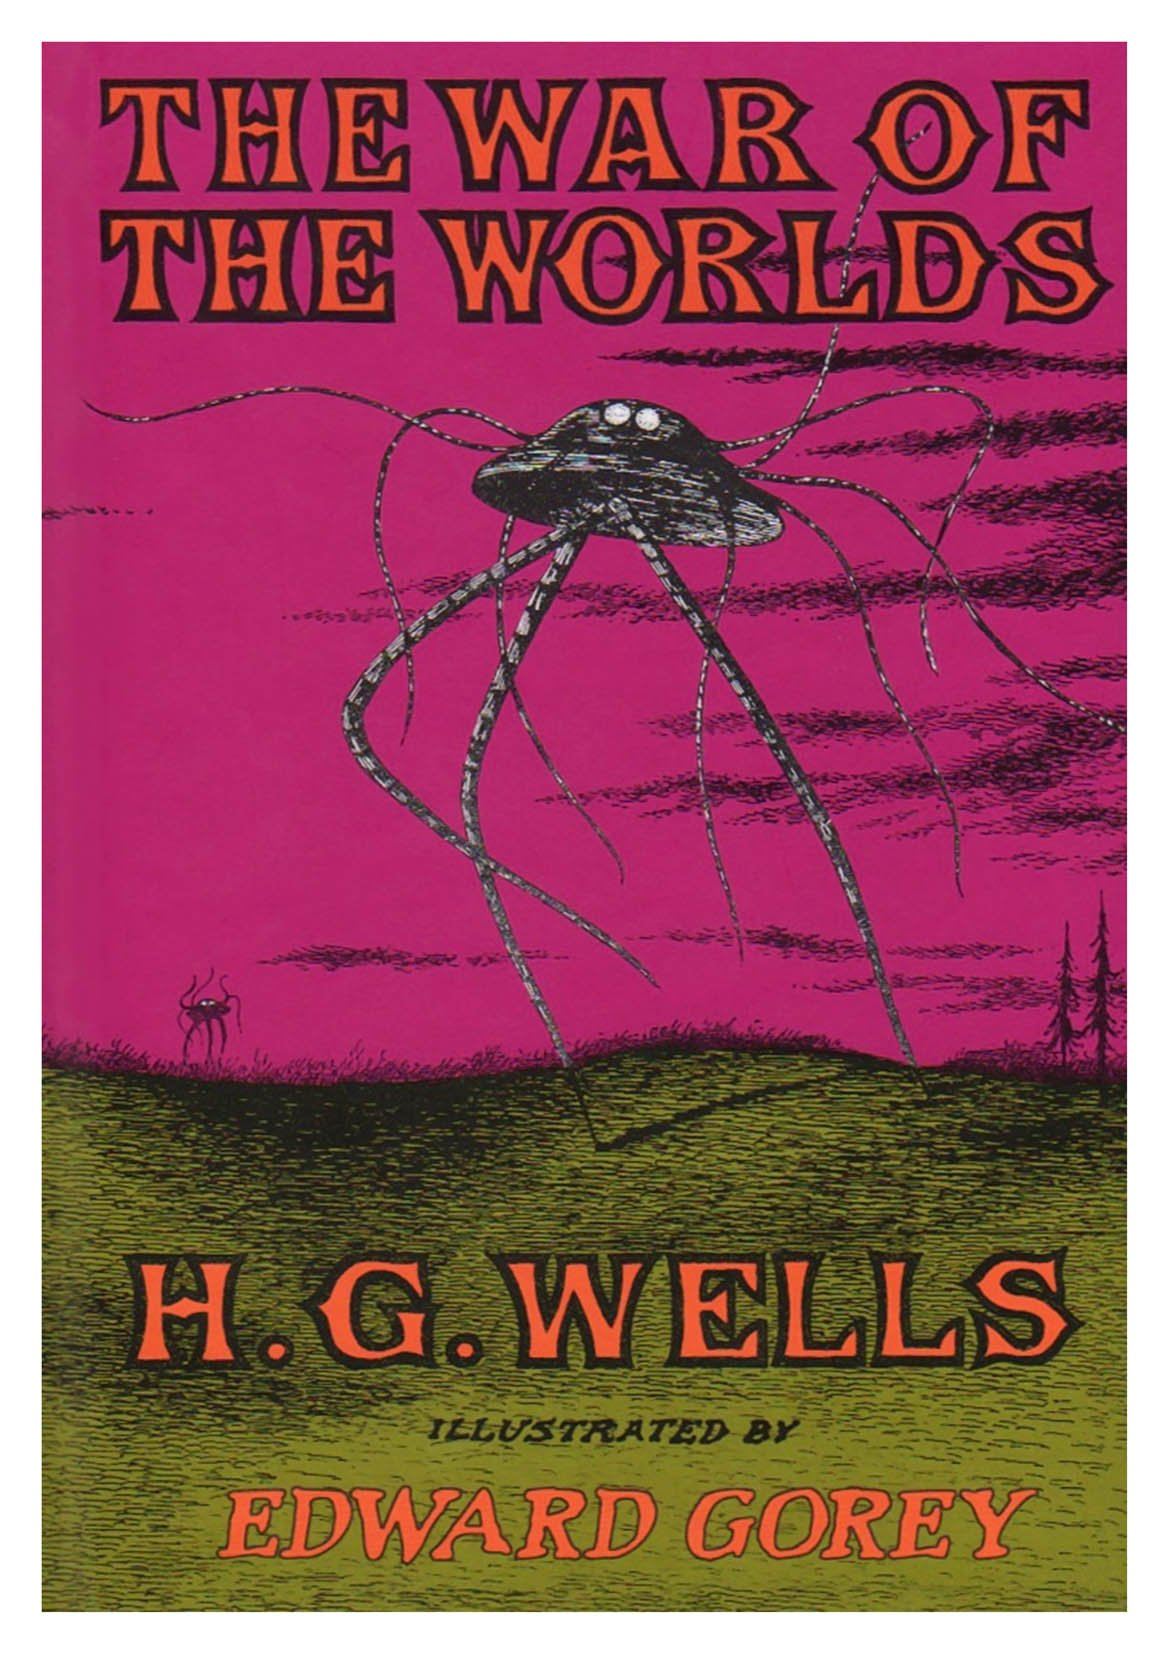 WAR OF THE WORLDS POSTER: Vintage Book Cover Art Print - The Print Arcade